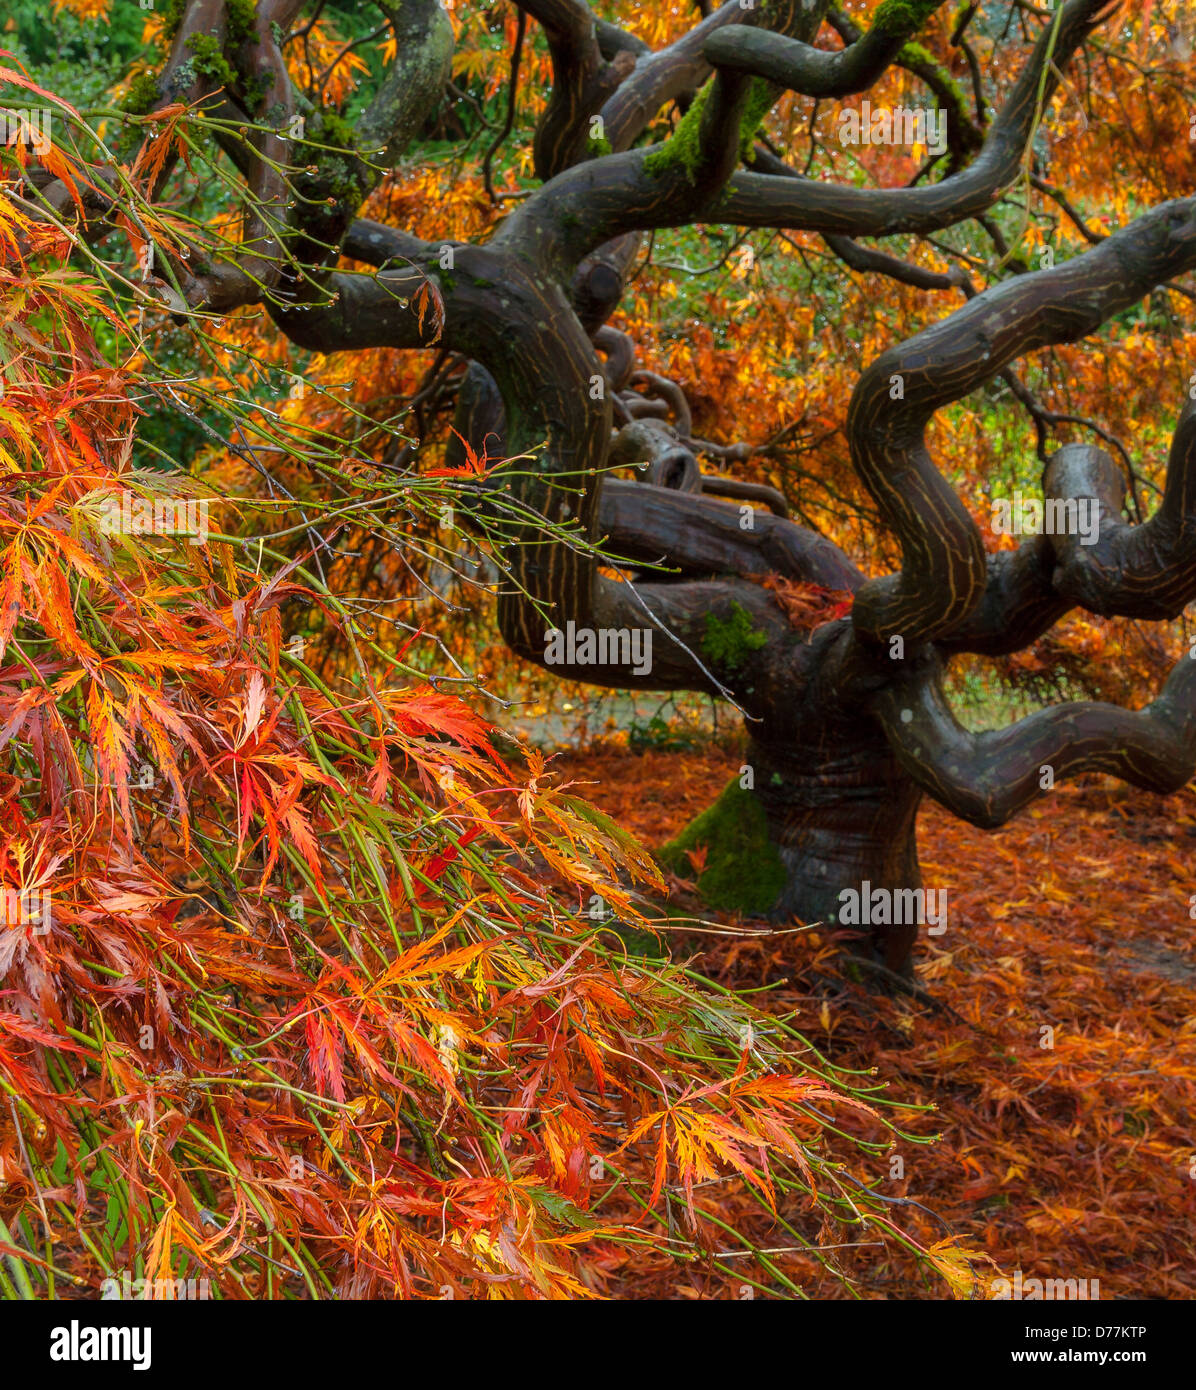 Kubota Garden, Seattle, WA: Twisted trunk and branches of a lace-leafed Japanese maple in fall color Stock Photo